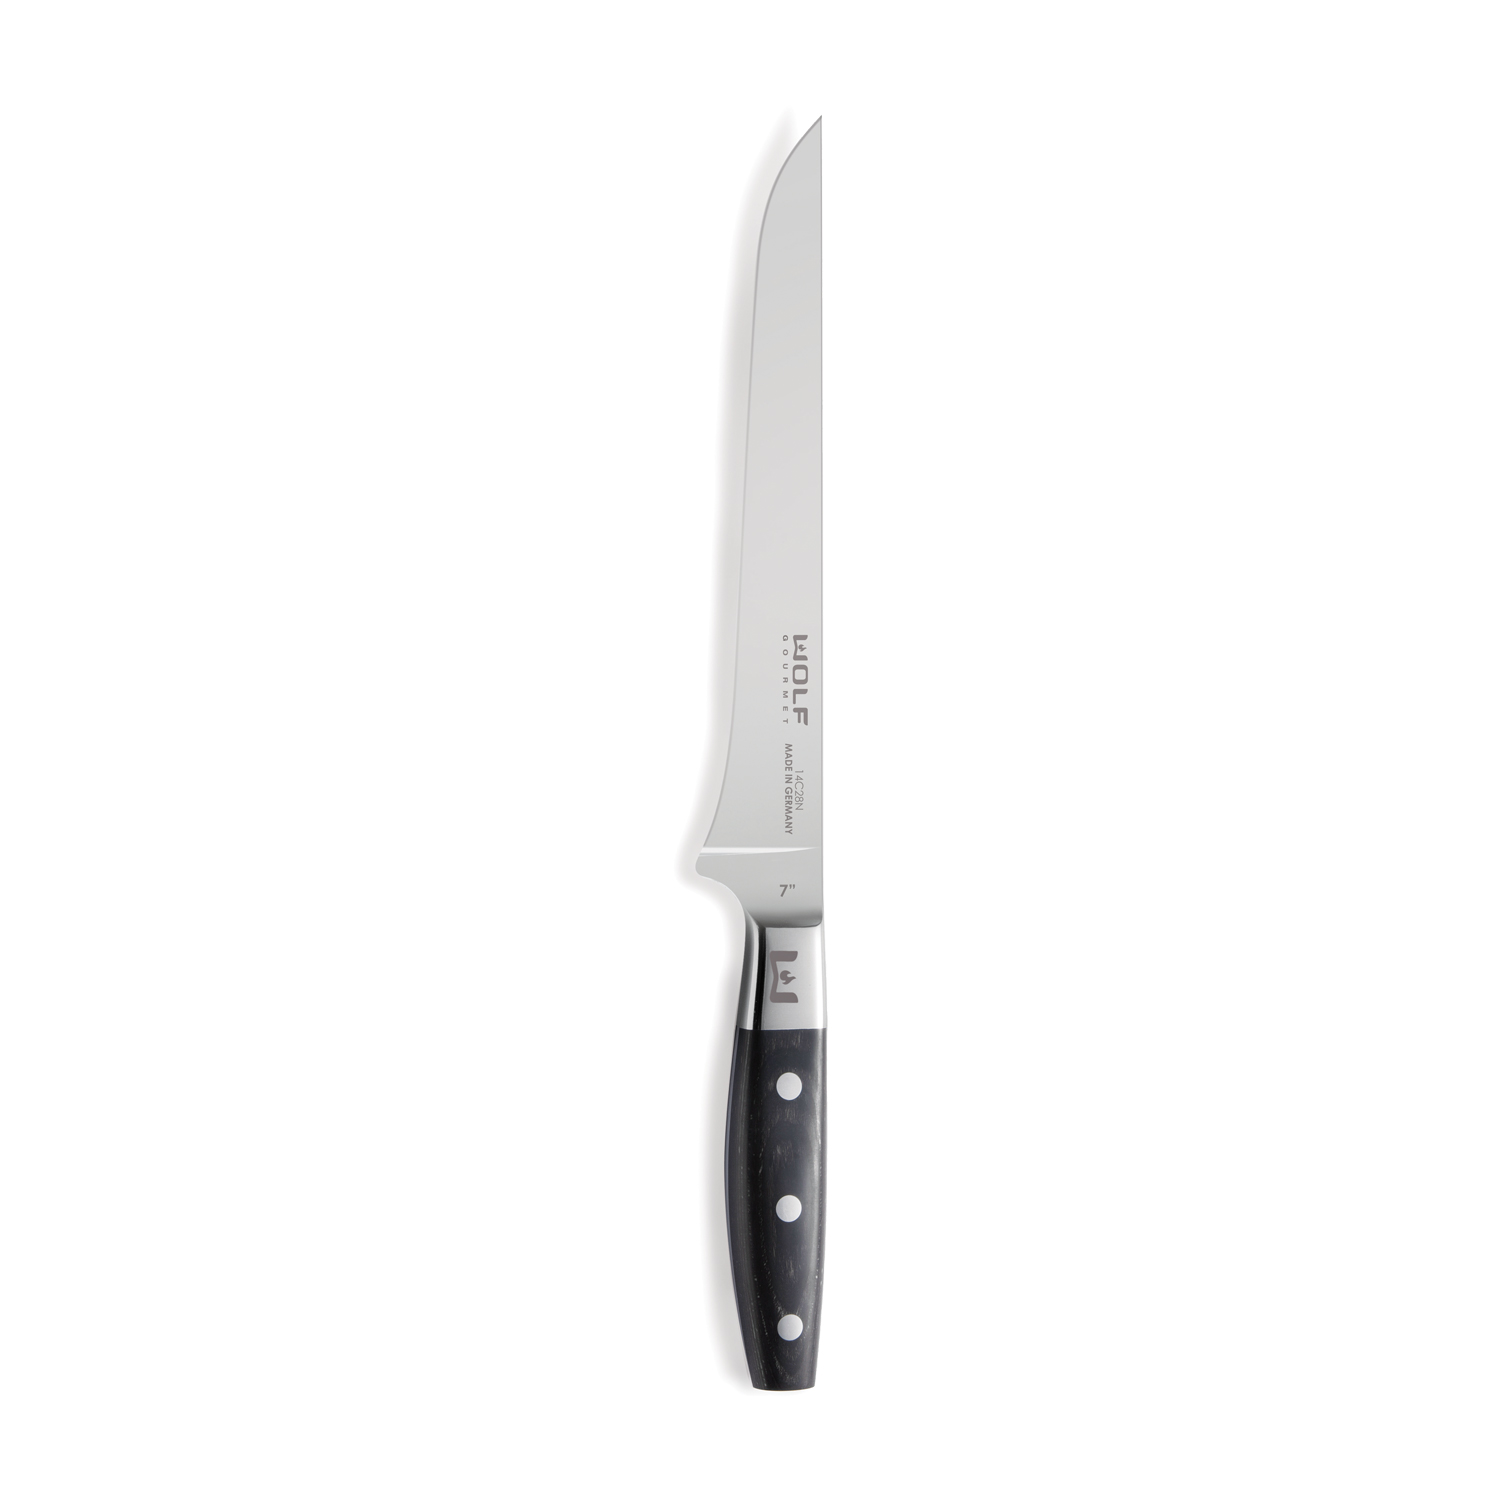 DDF iohEF Fillet Knife 7 Inch Boning Knife High Carbon Stainless